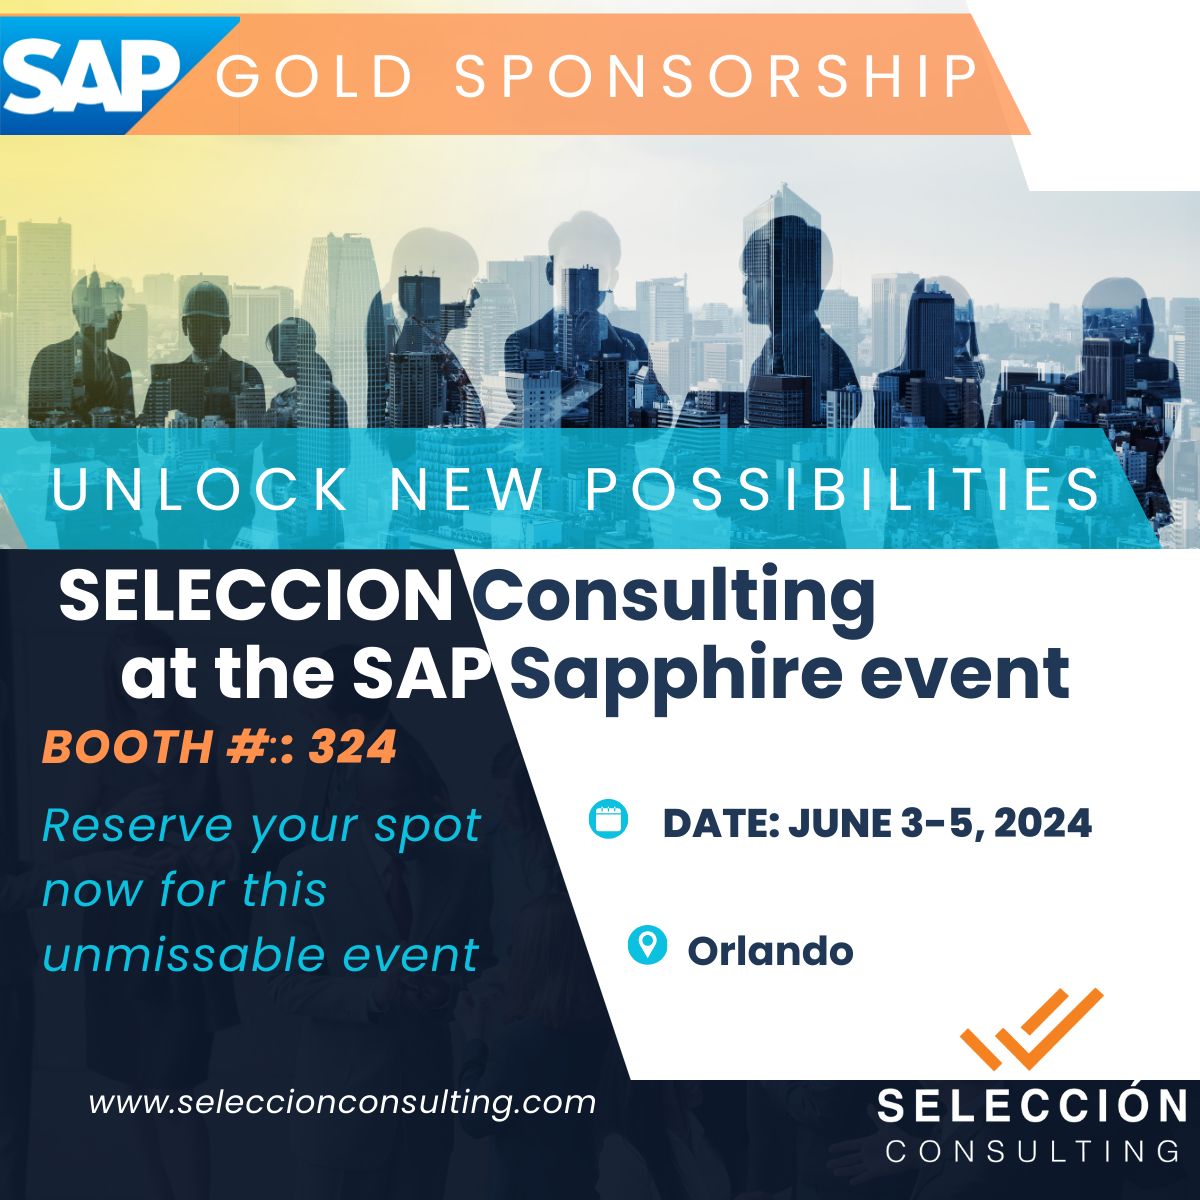 #SELECCIONConsulting is a #Goldsponsor at the #SAPSapphire event, showcasing our commitment to digital transformation and innovation. Connect with us to learn how we can help you optimize your #SAPenvironment and drive your #business goals forward. 
Reserve your spot today!